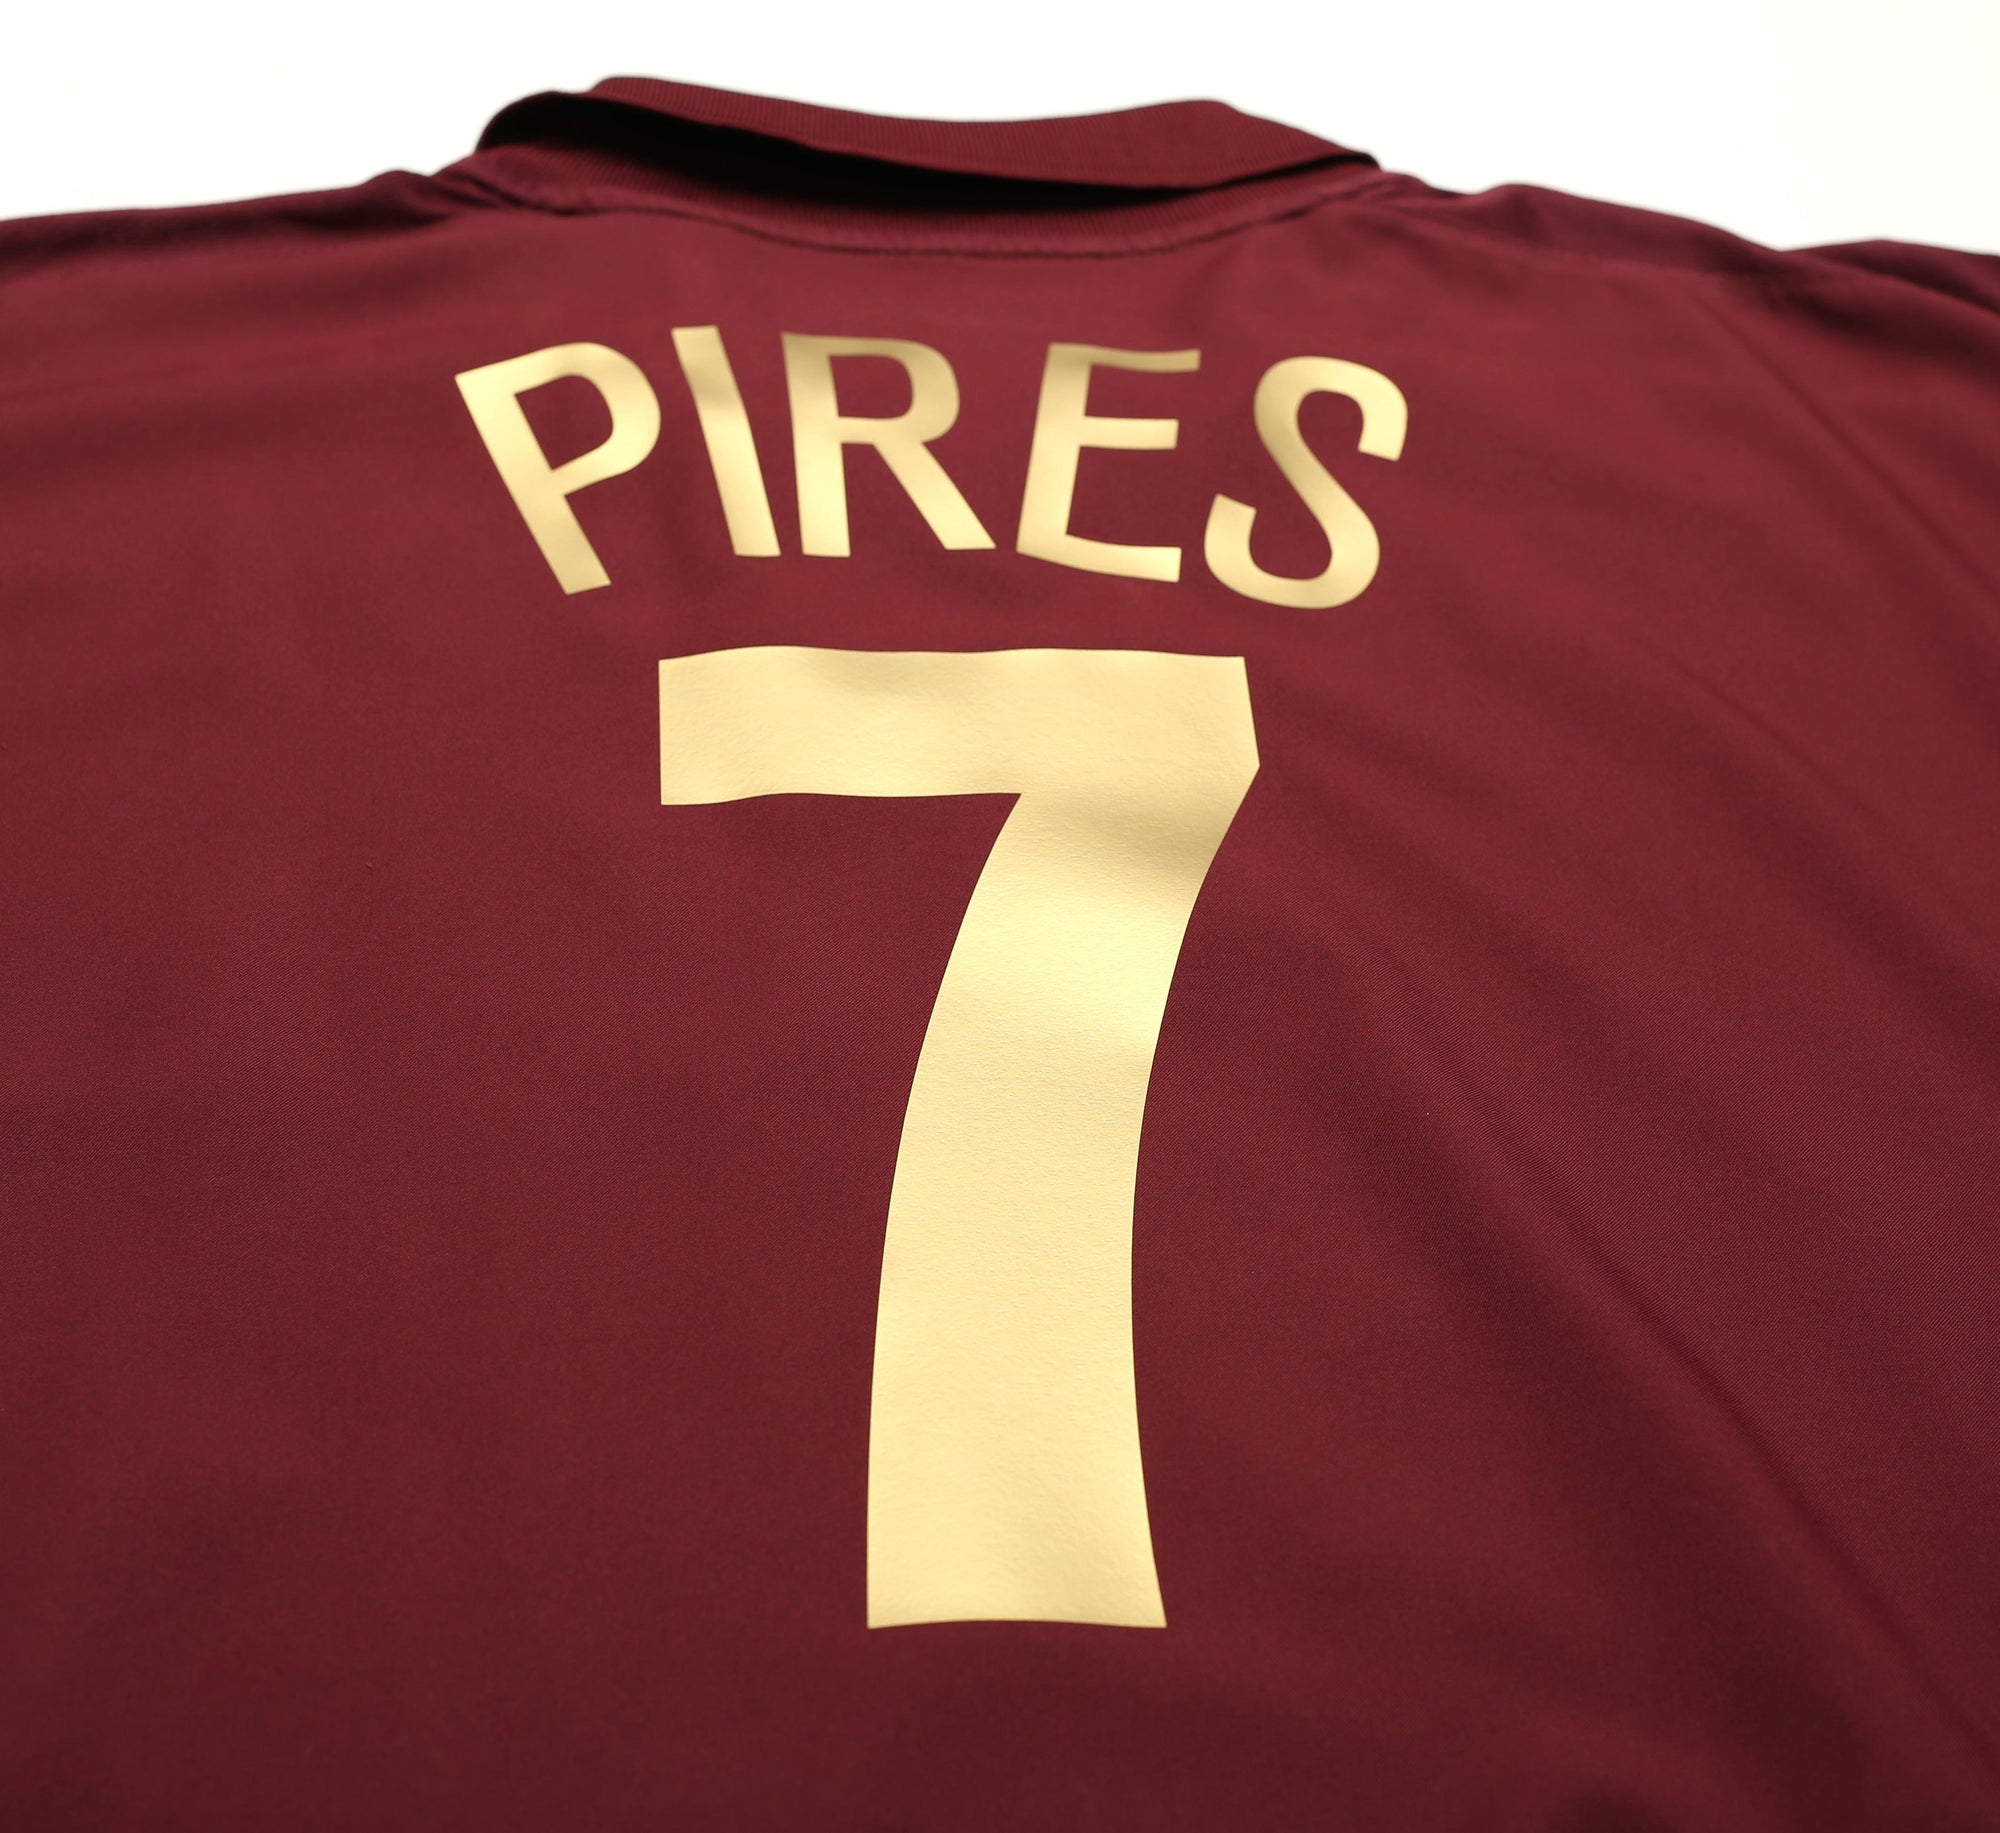 2005/06 PIRES #7 Arsenal Vintage Nike UCL Home Football Shirt Jersey (XXL)